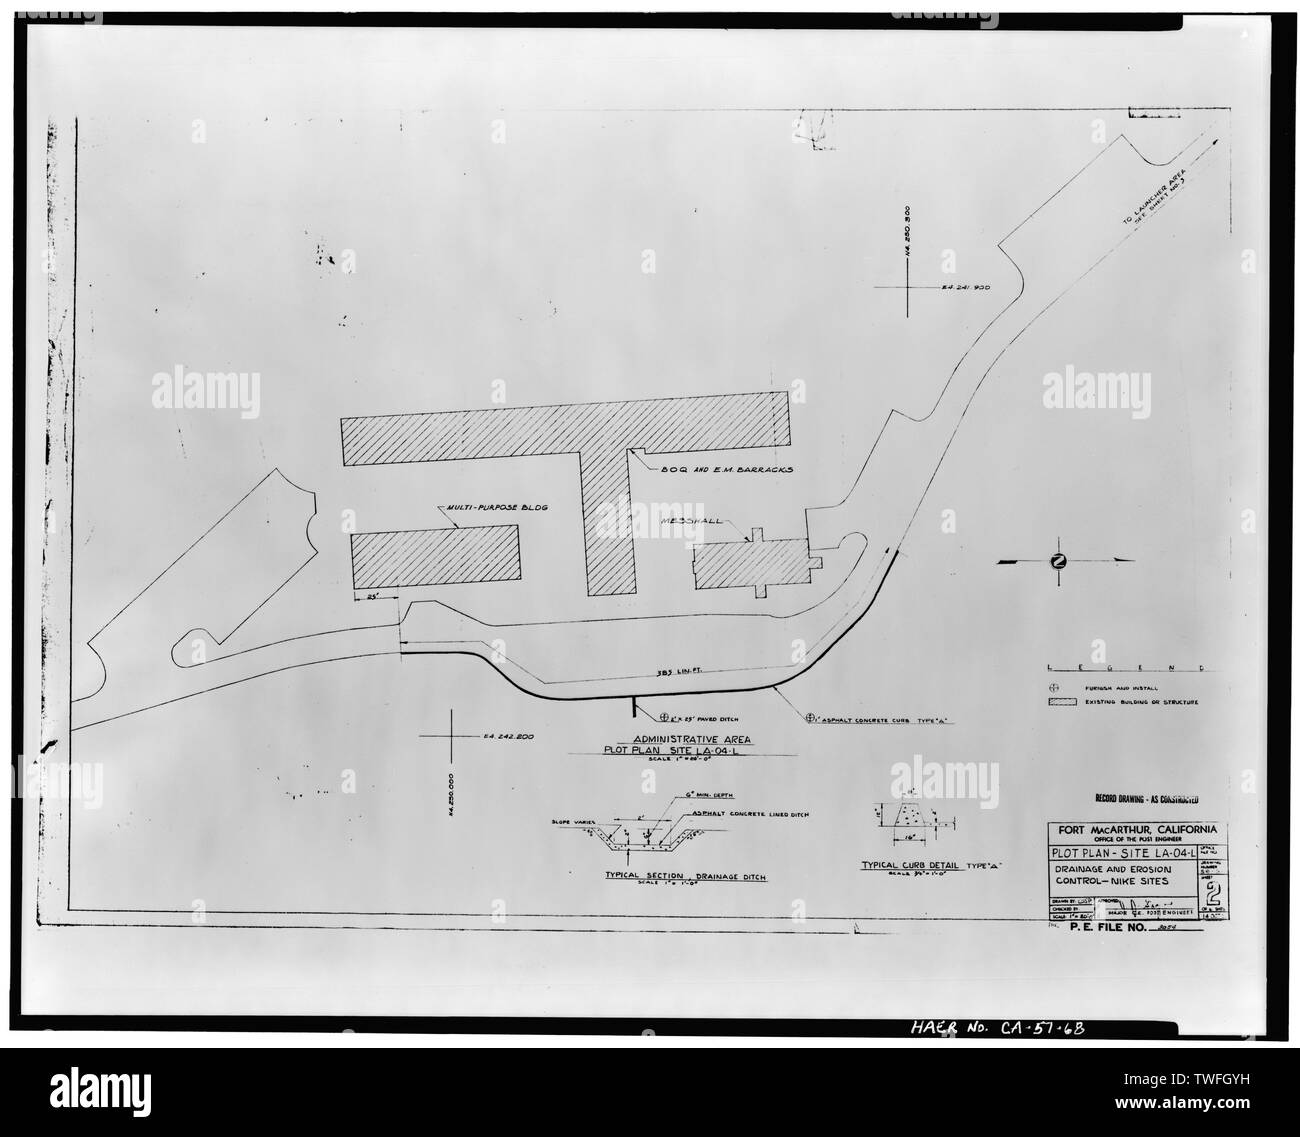 PLOT PLAN -SITE LA-04-L DRAINAGE AND EROSION CONTROL - NIKE SITES - Mount Gleason Nike Missile Site, Angeles National Forest, South of Soledad Canyon, Sylmar, Los Angeles County, CA Stock Photo